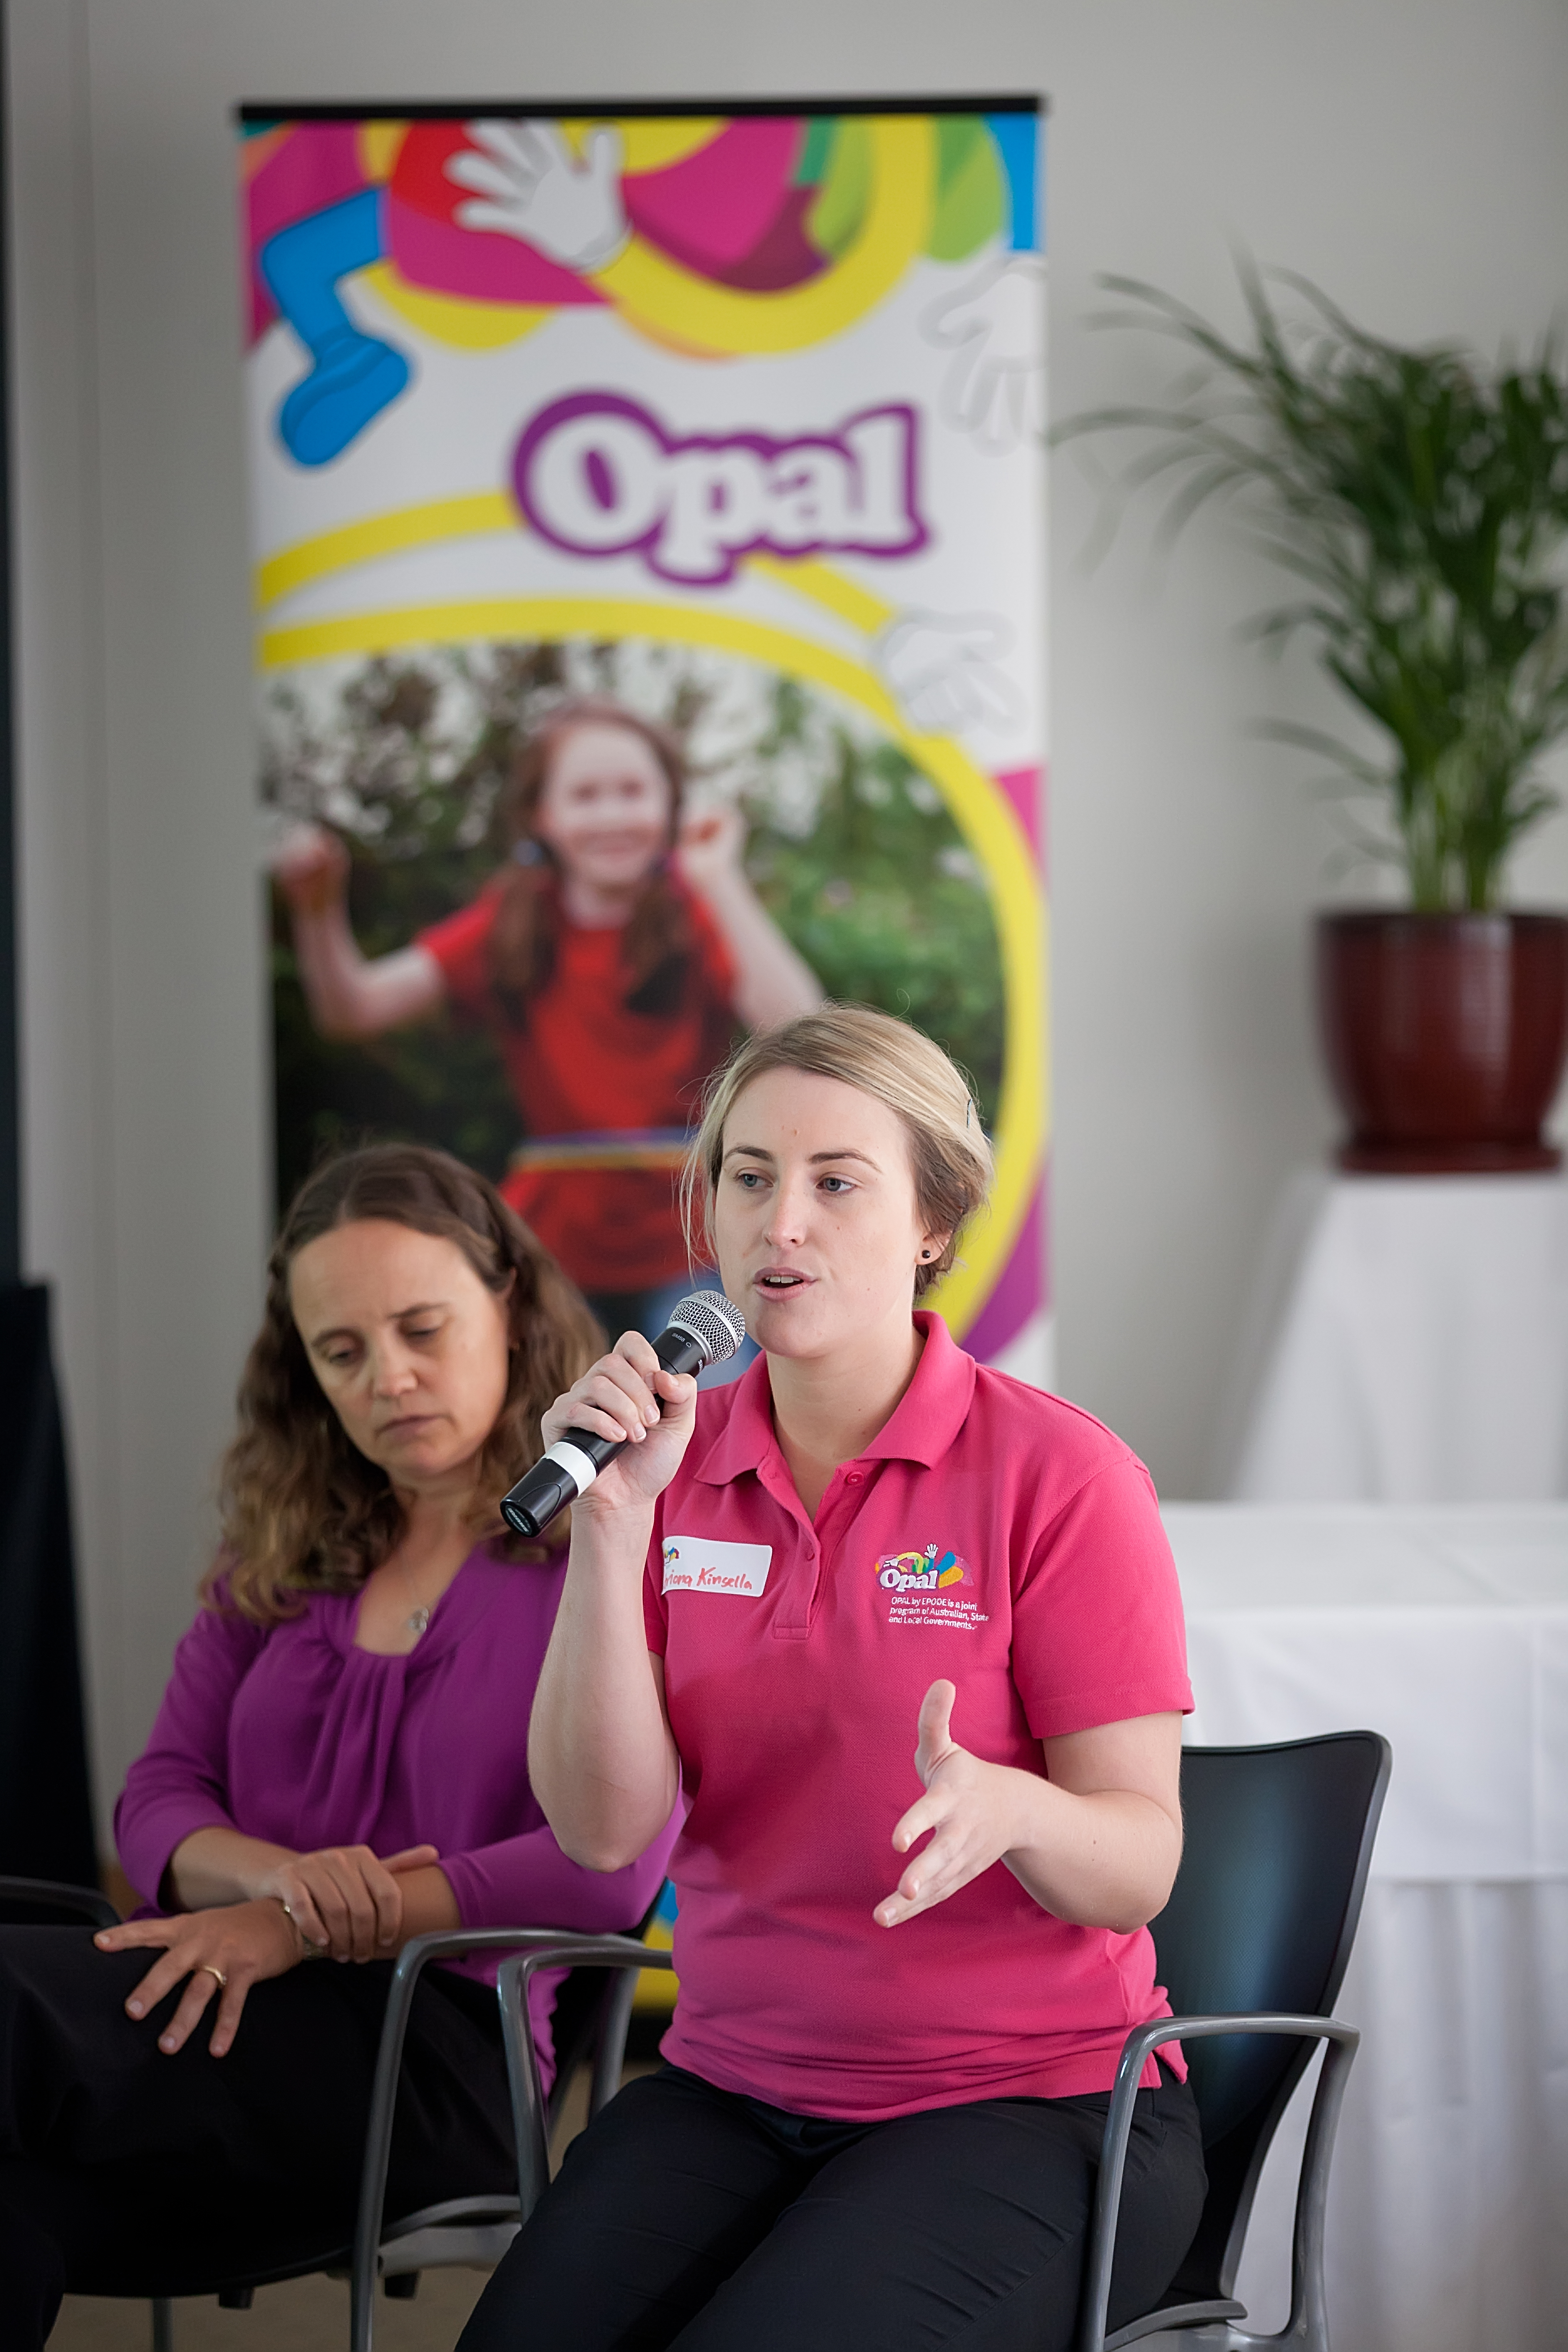 Female three speaking in front of OPAL banner